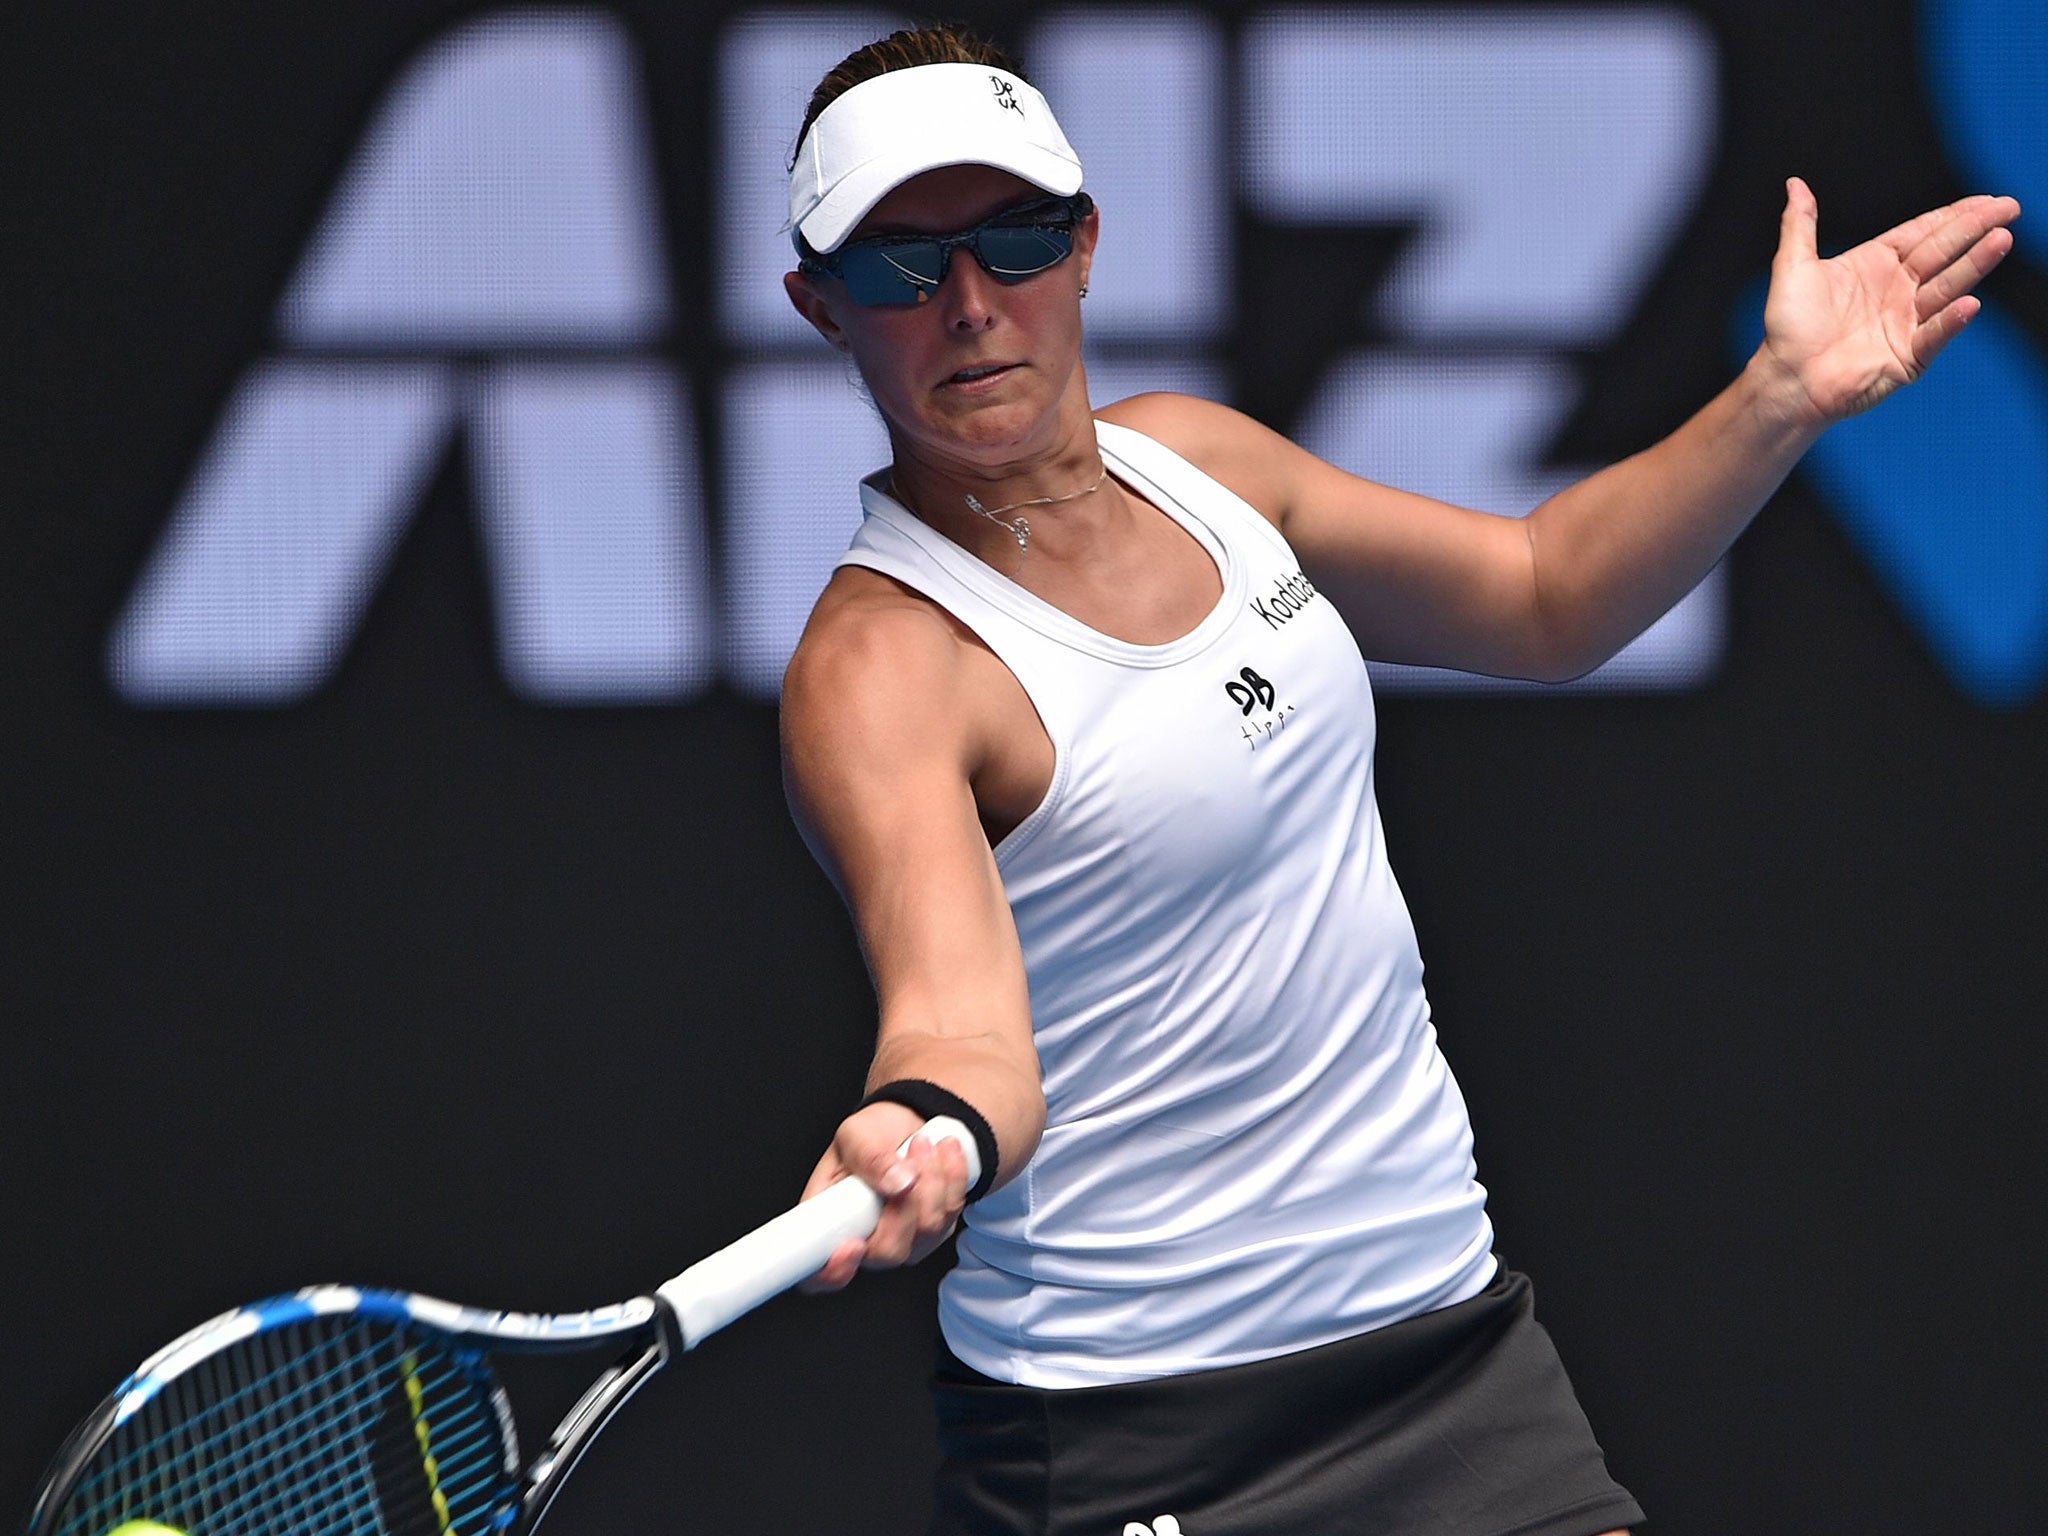 Flipkens was able to push Konta despite dropping to 70th in the rankings